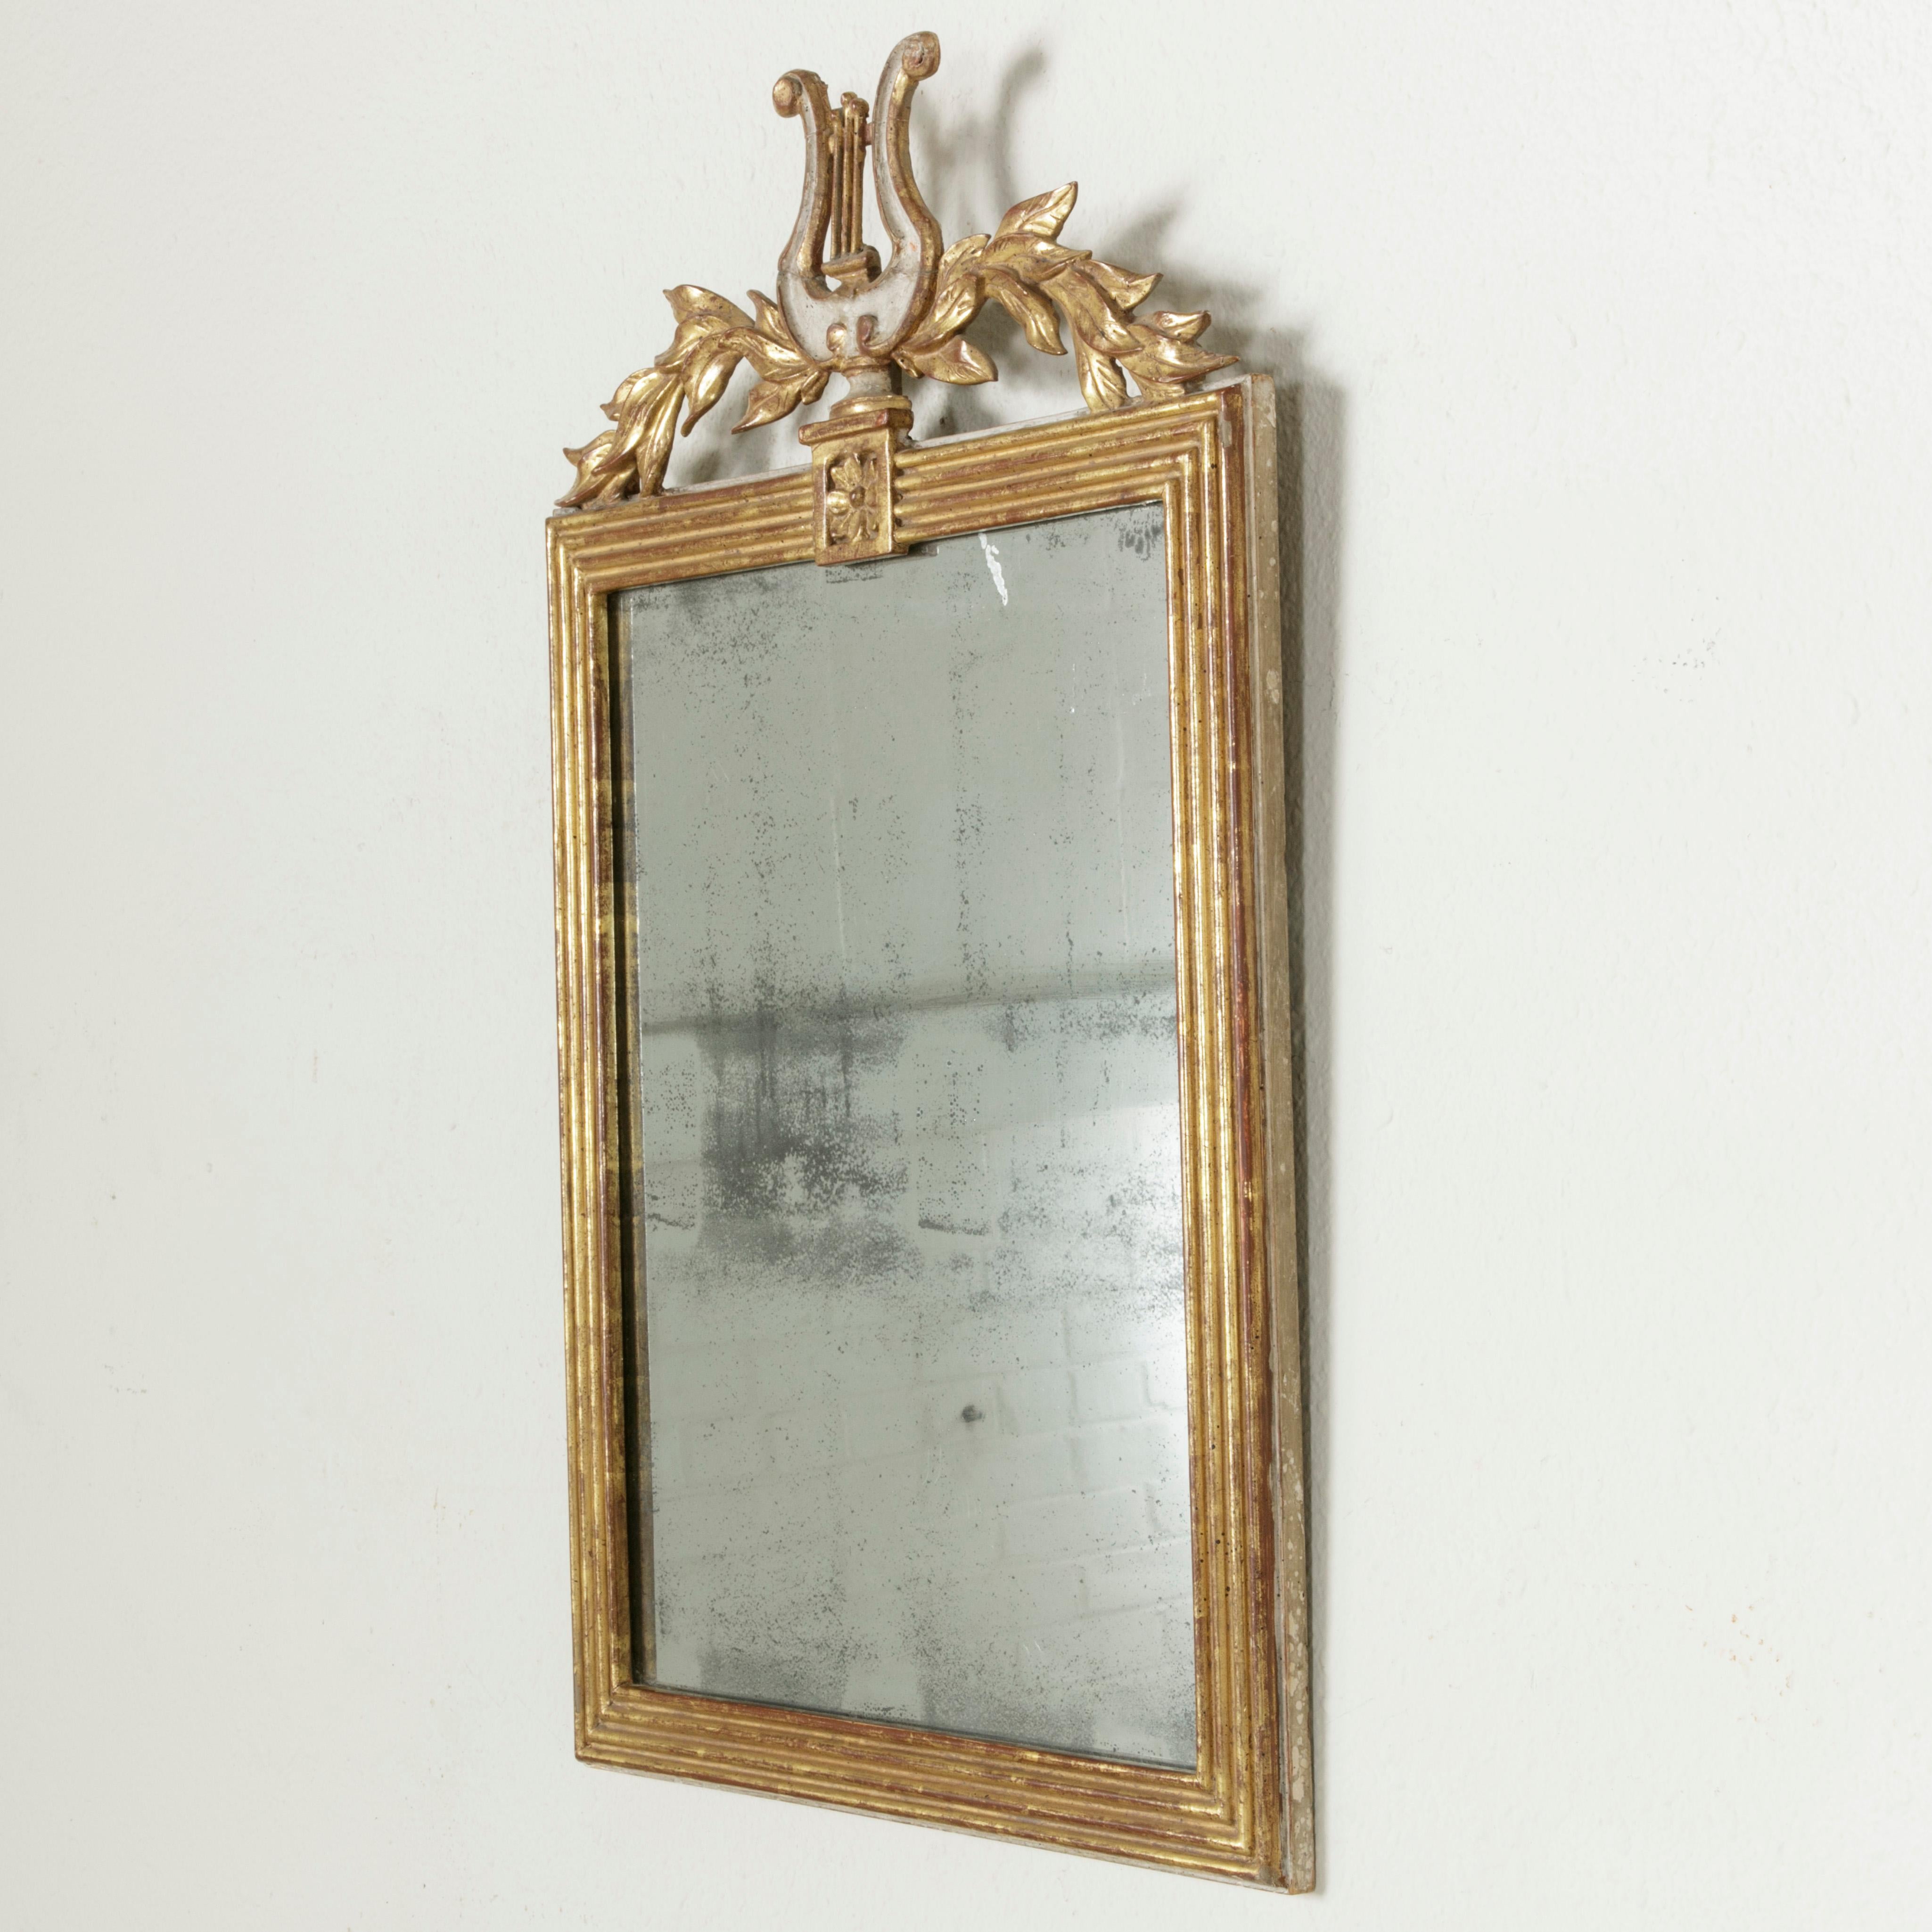 From the time of Napoleon Bonaparte, this French Empire period giltwood mirror from the early 19th century features a sculptural lyre flanked by laurel branches. Its original mercury glass is surrounded by a square fluted frame with a single rosette